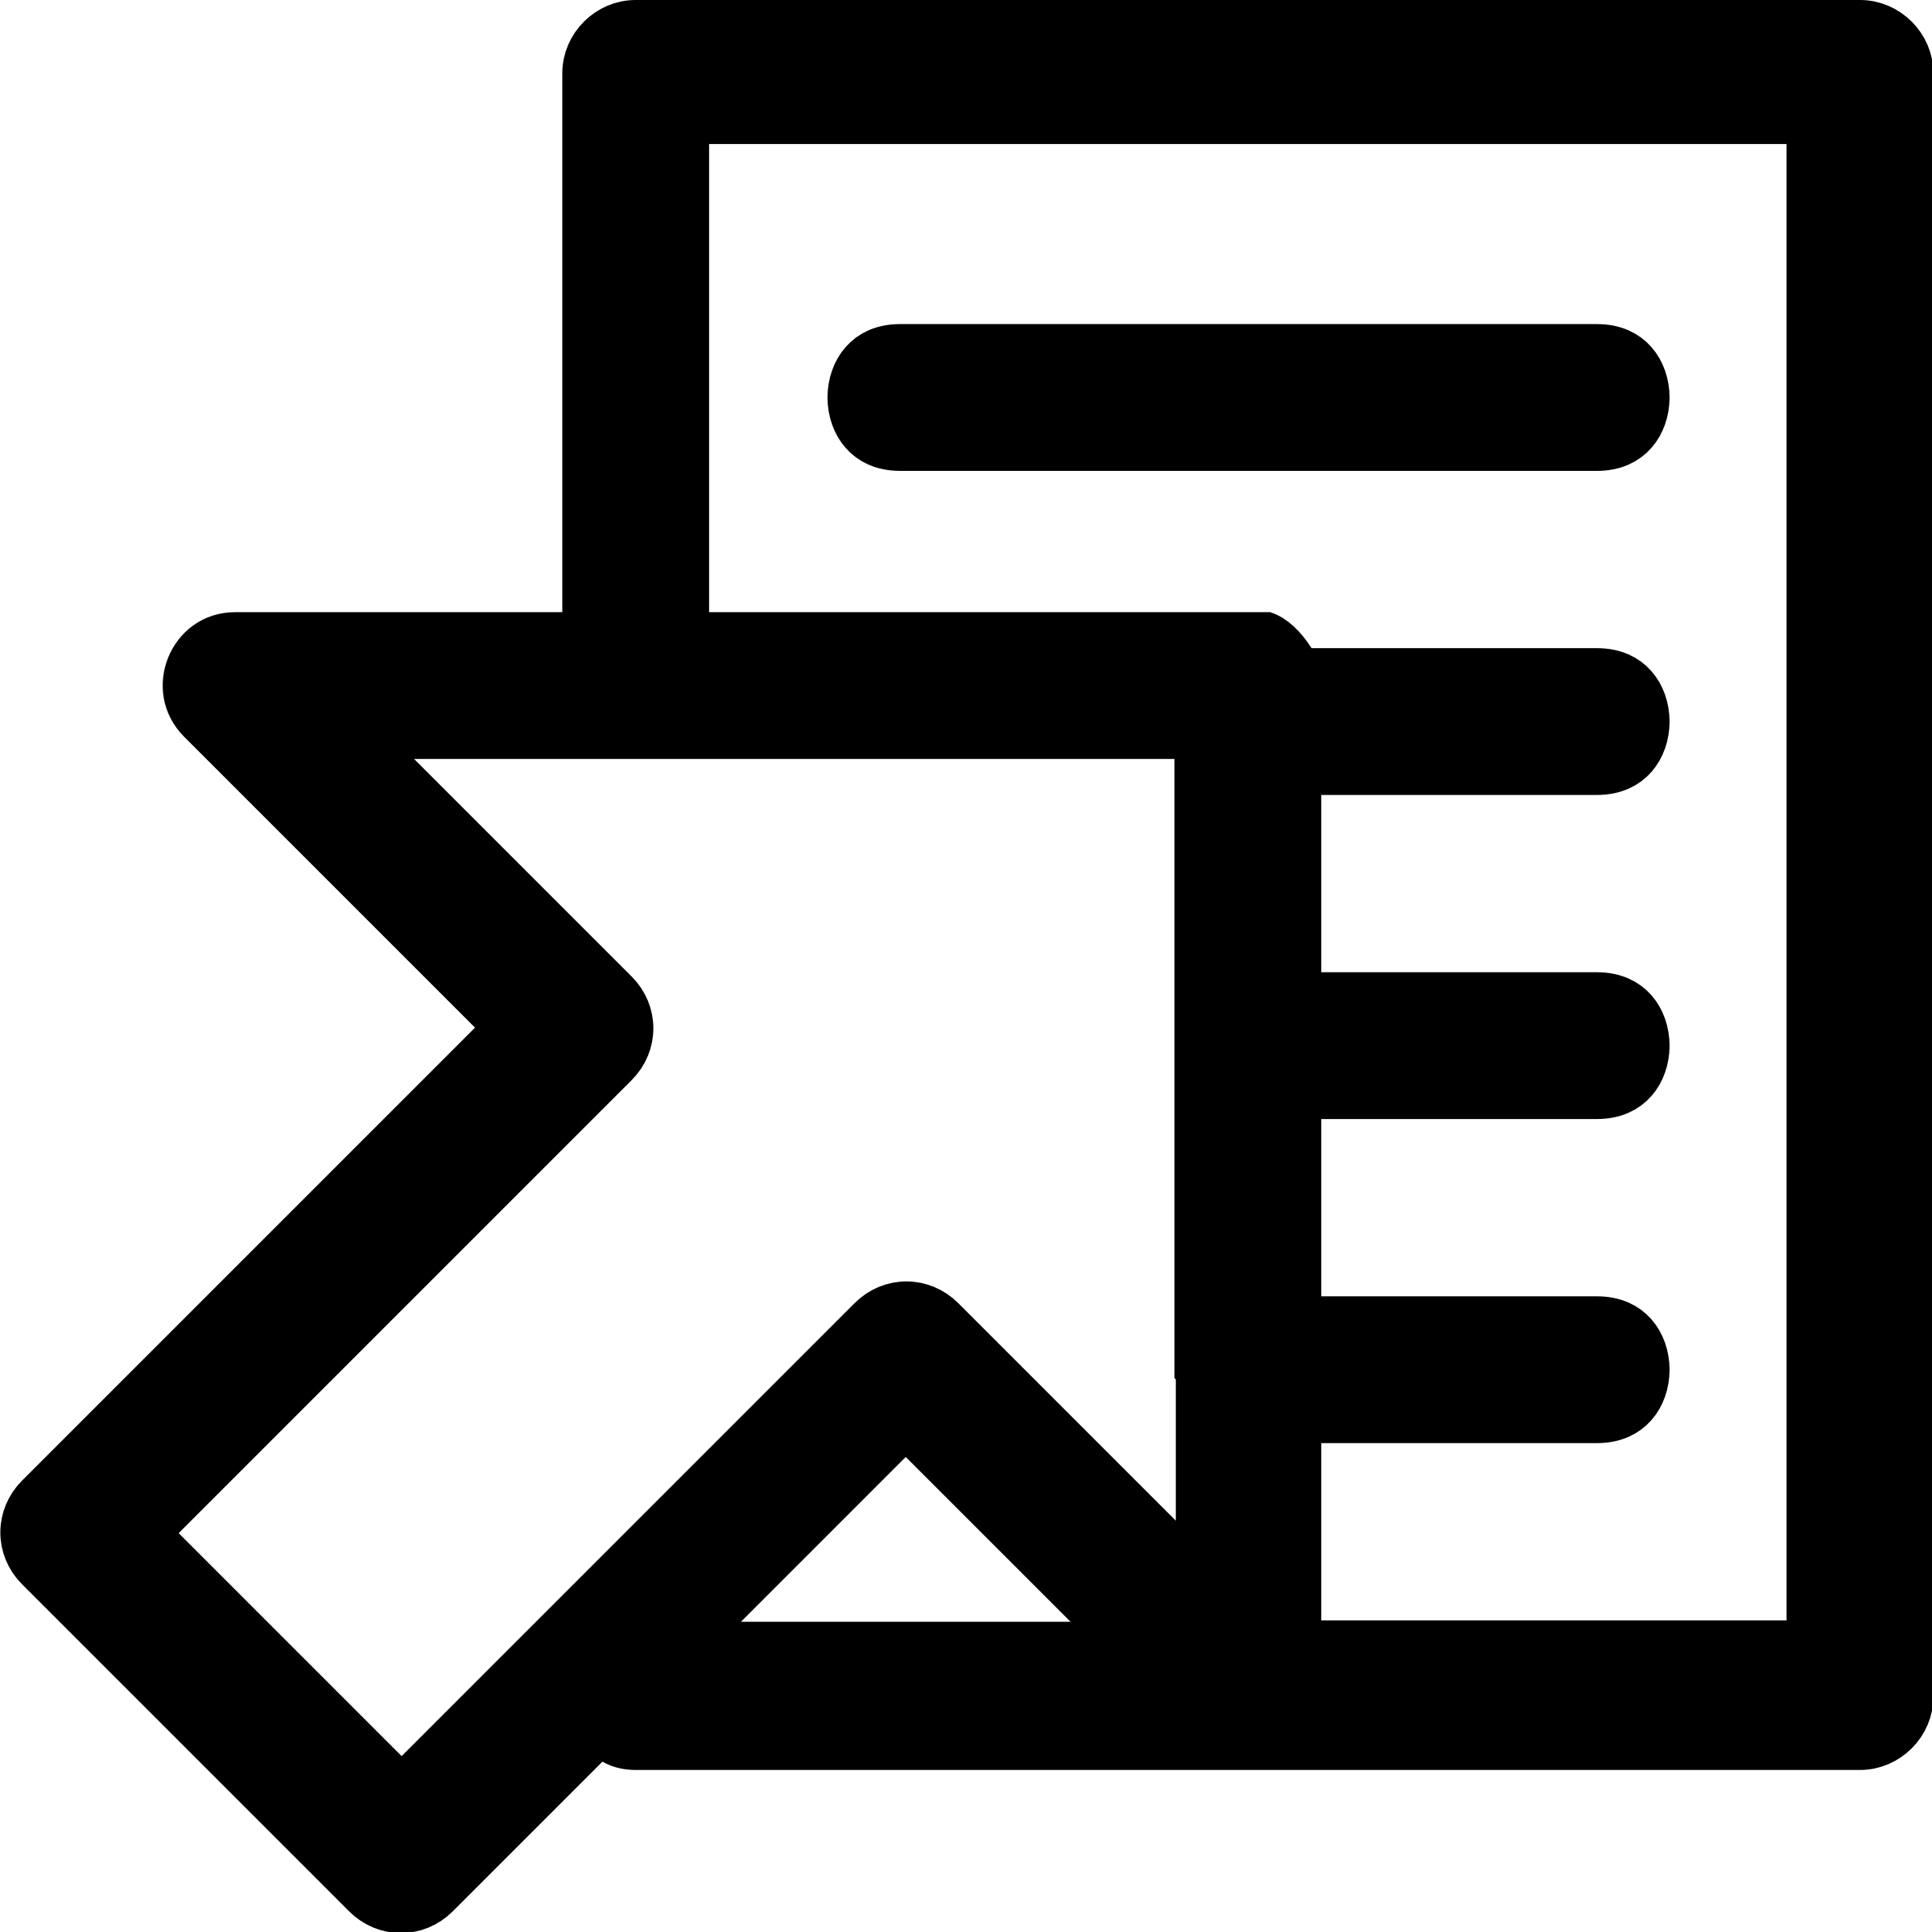 Iconic Star Document Symbol PNG